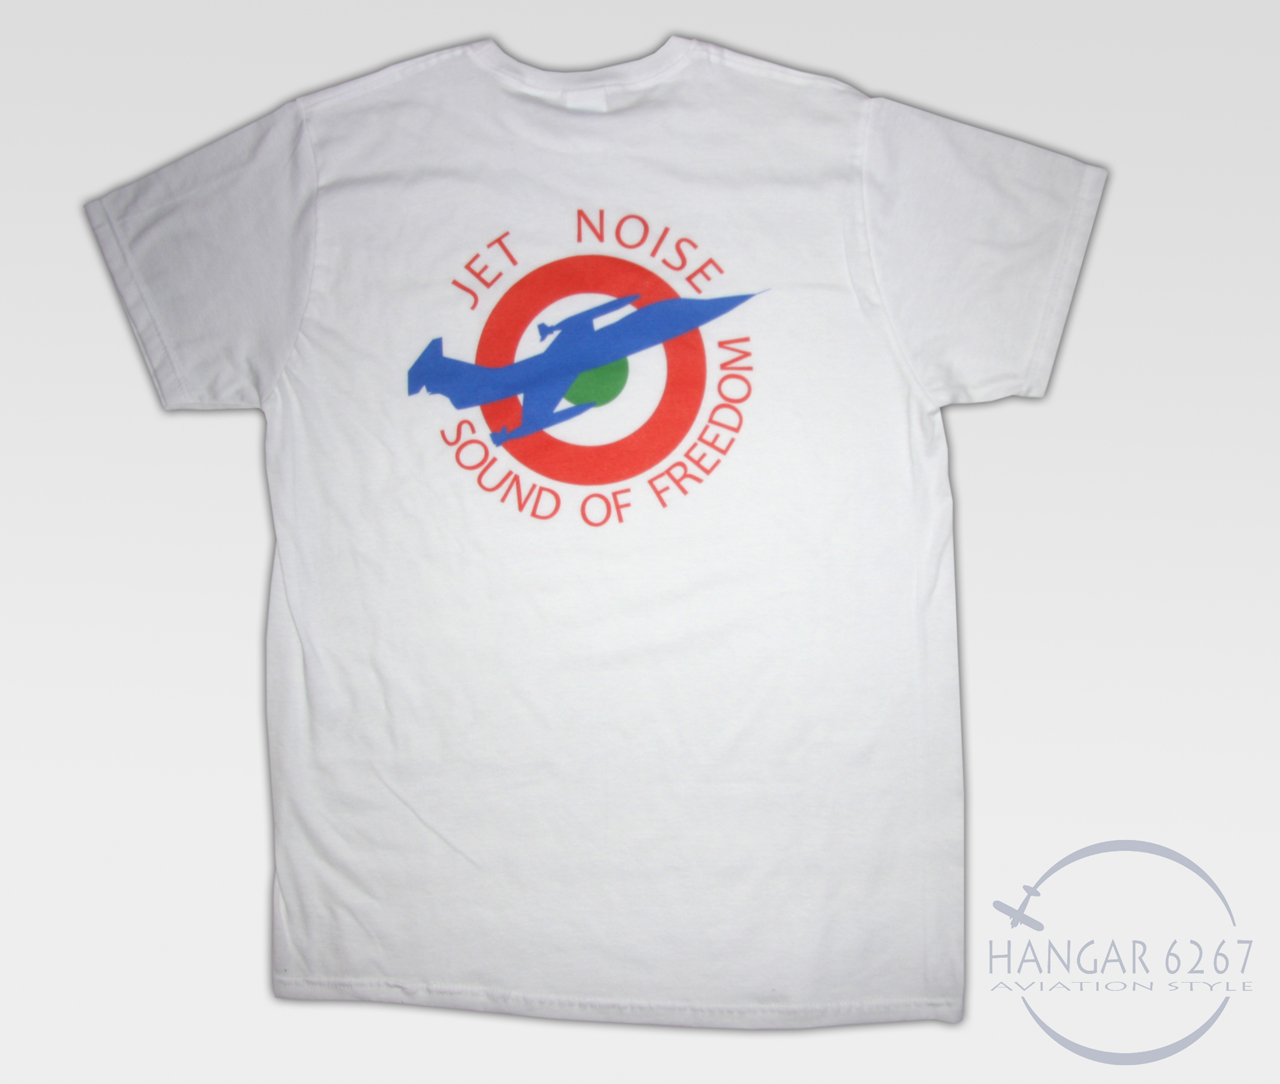 “Jet noise, sound of freedom” – t-shirt F-104 Starfighter